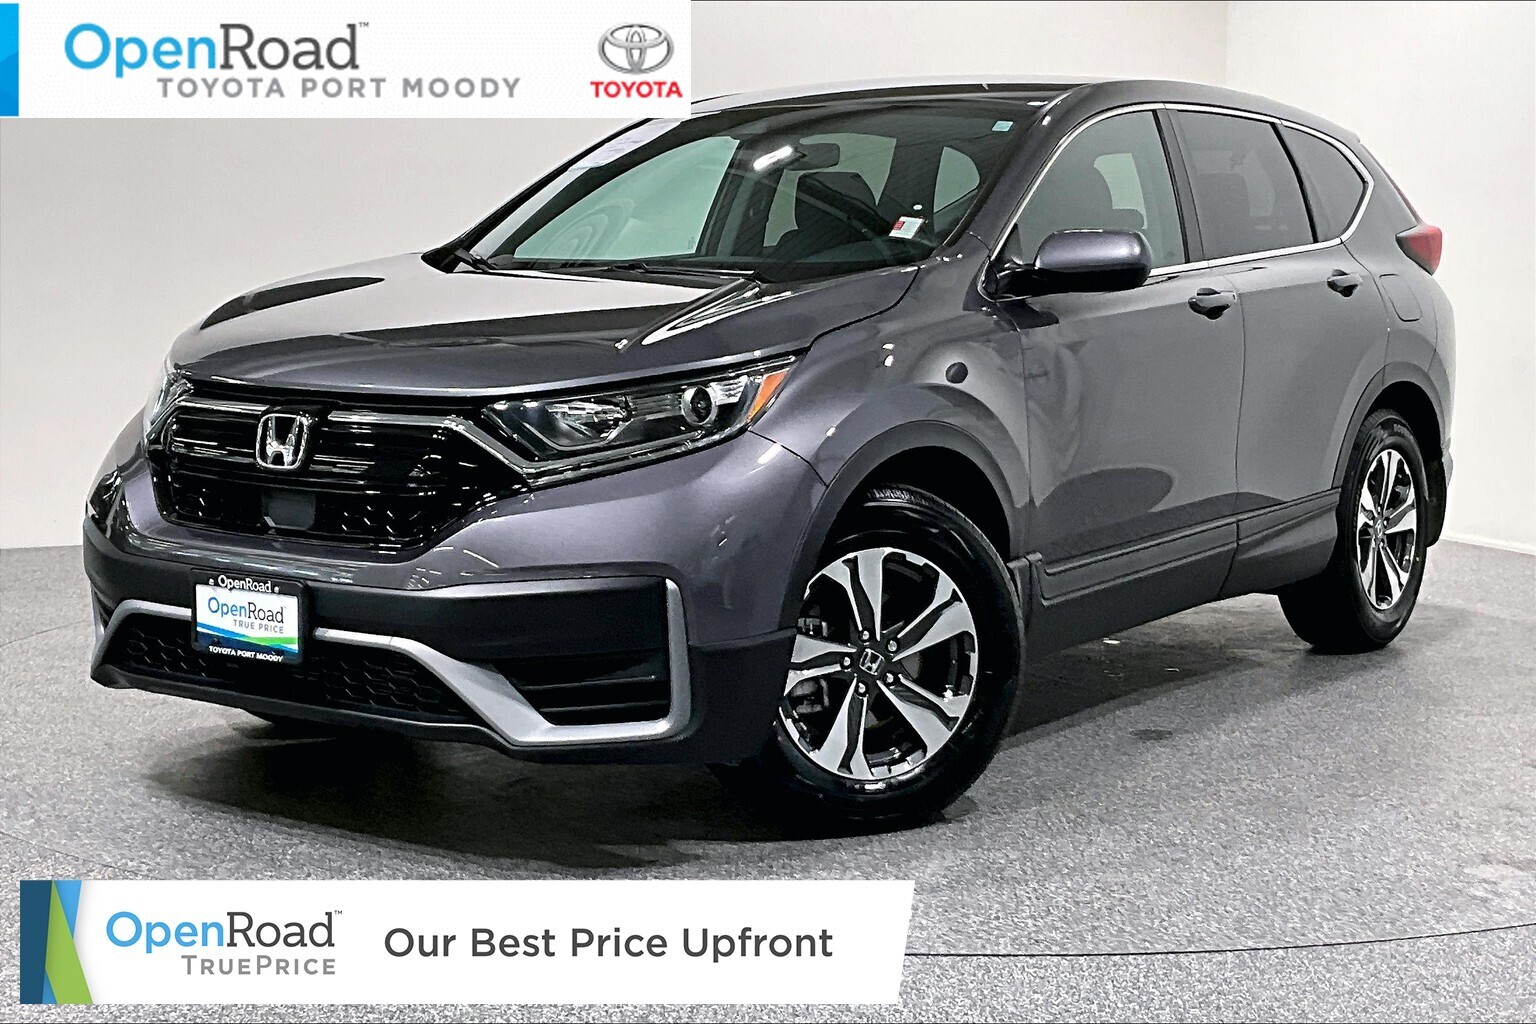 2021 Honda CR-V LX 2WD |OpenRoad True Price |Local |One Owner |No 